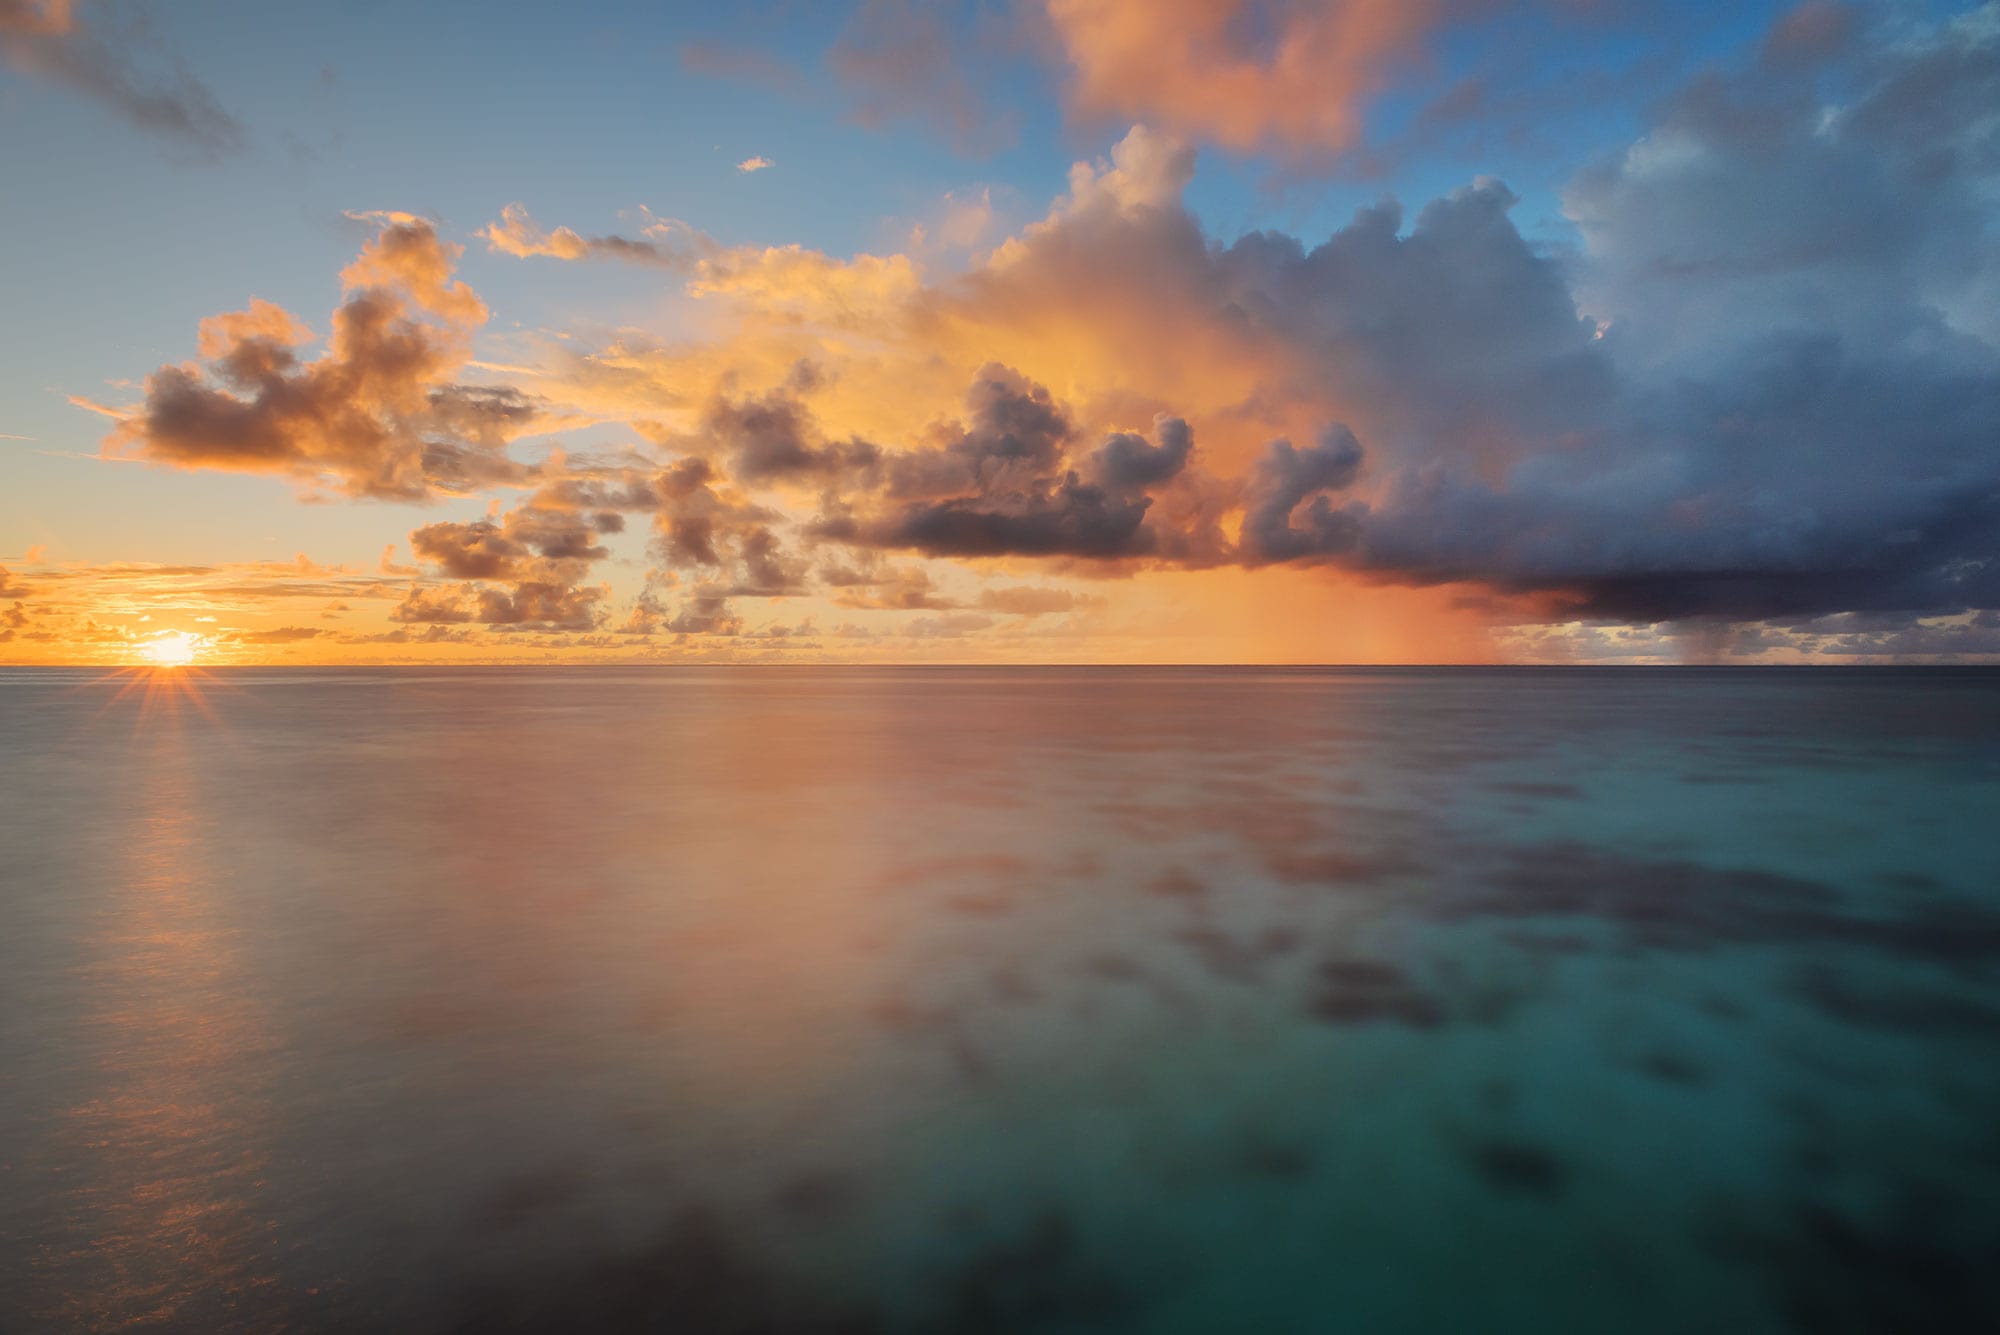 Landscape photograph capturing a romantic and paradisiac sunset in the Maldives, taken on the island of Thudufushi, showcasing vibrant hues painting the sky and reflecting off the tranquil waters.